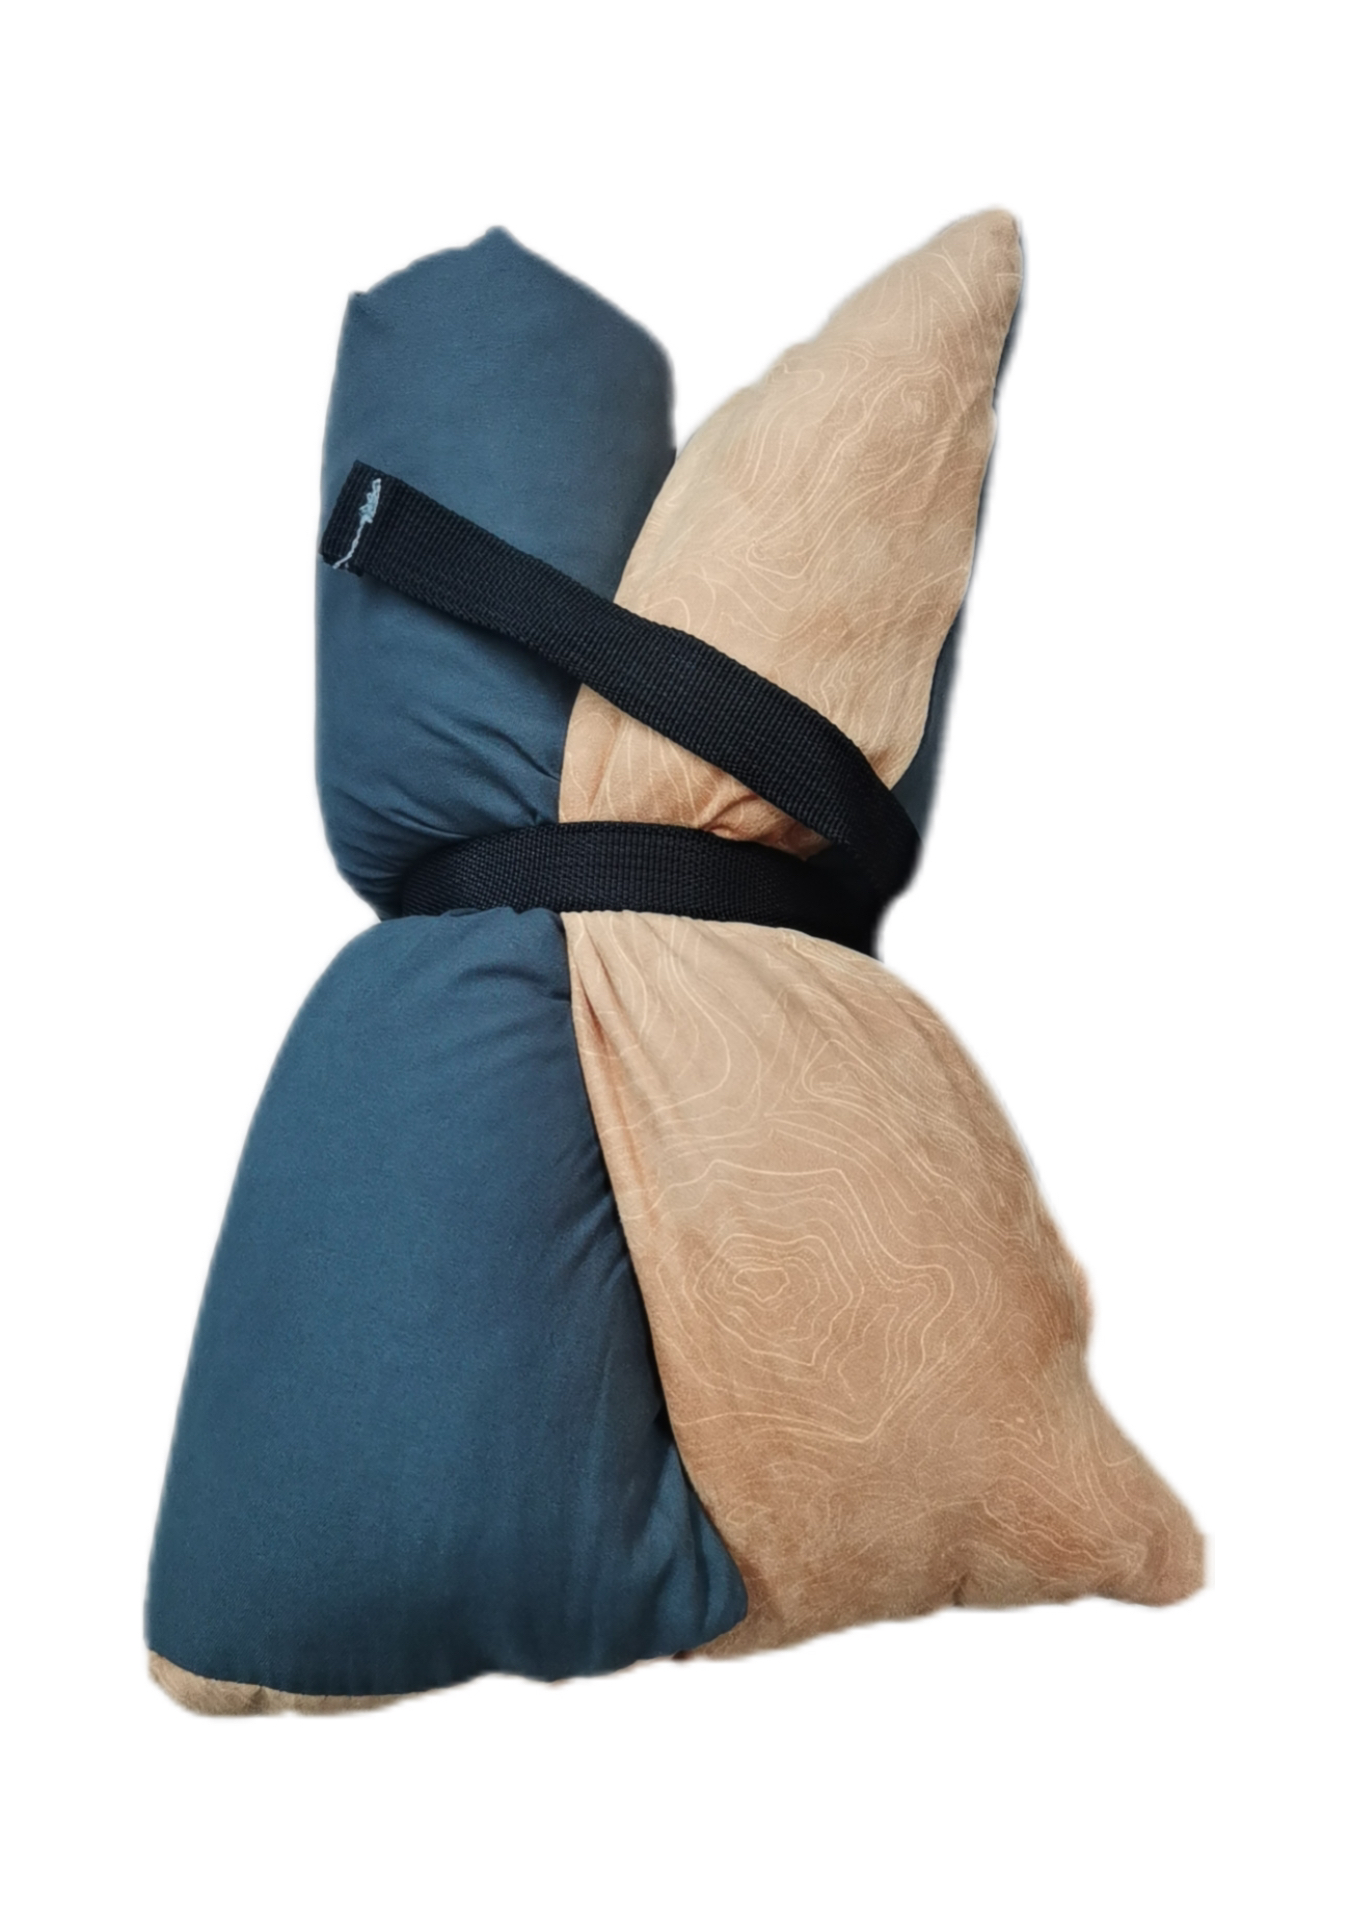 thermarest camping pillow